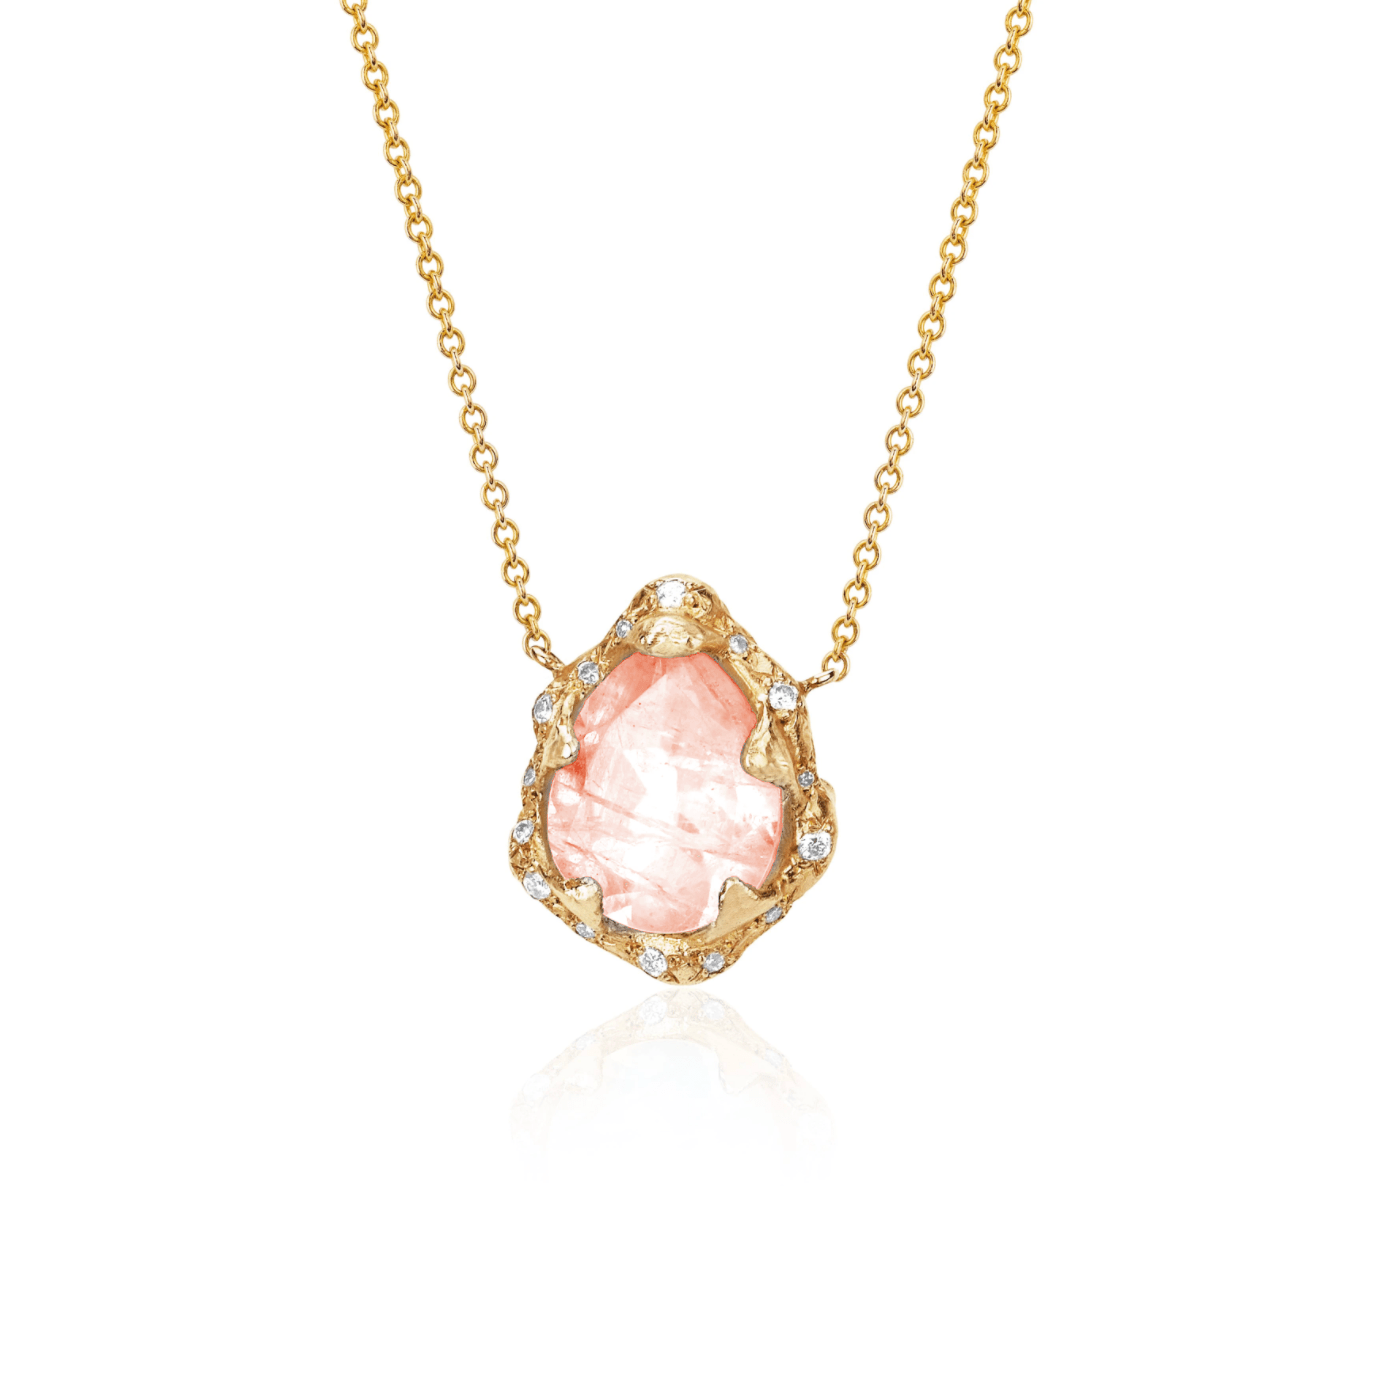 Baby Queen Water Drop Morganite Necklace with Sprinkled Diamonds